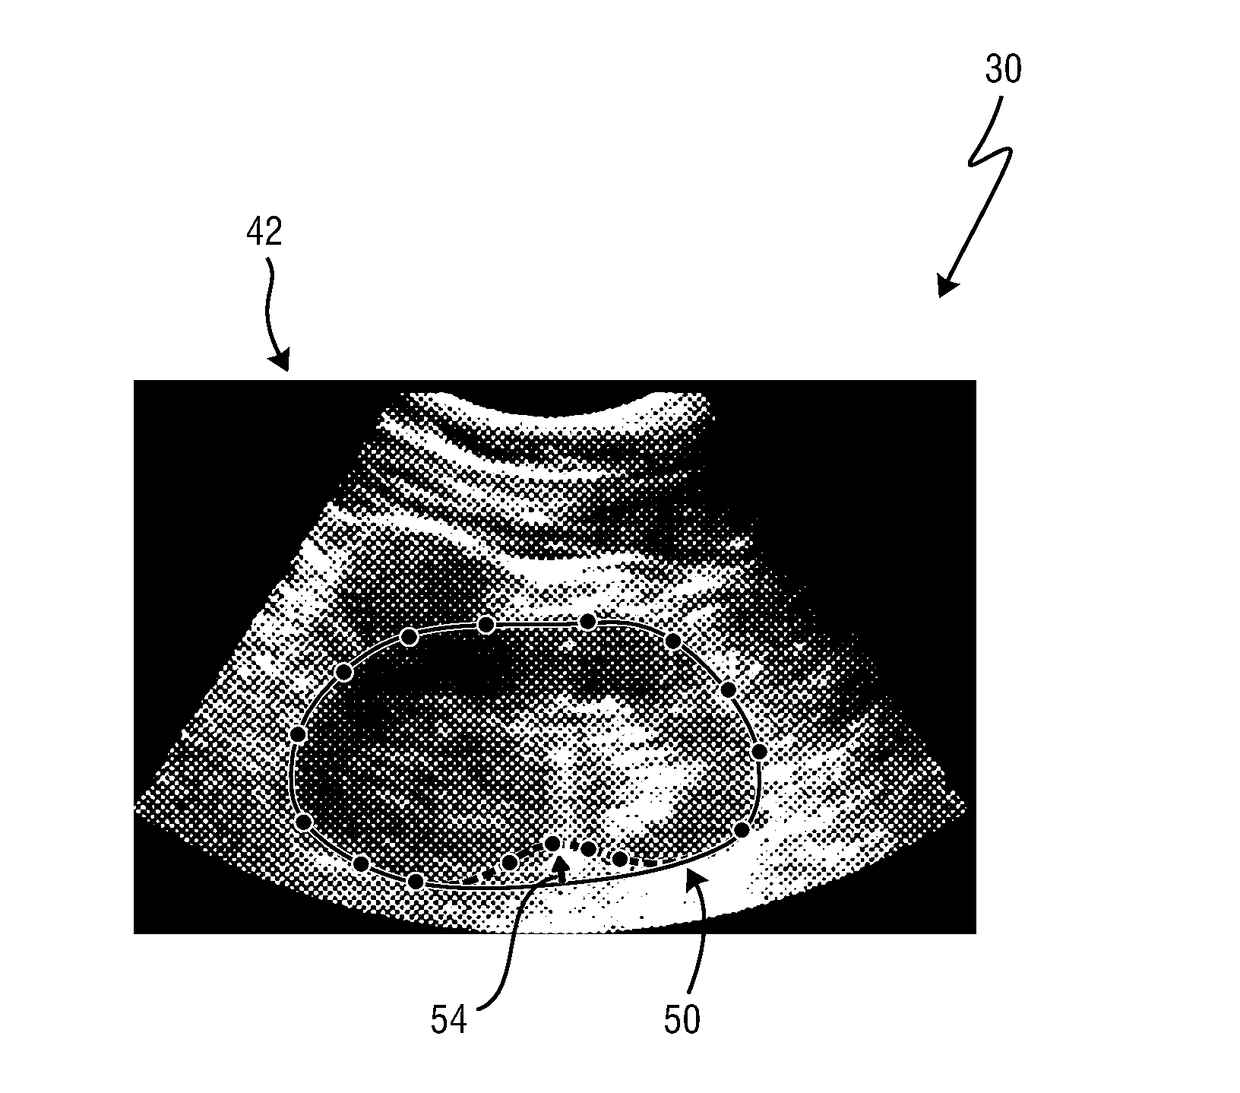 Ultrasound imaging apparatus and method for segmenting anatomical objects